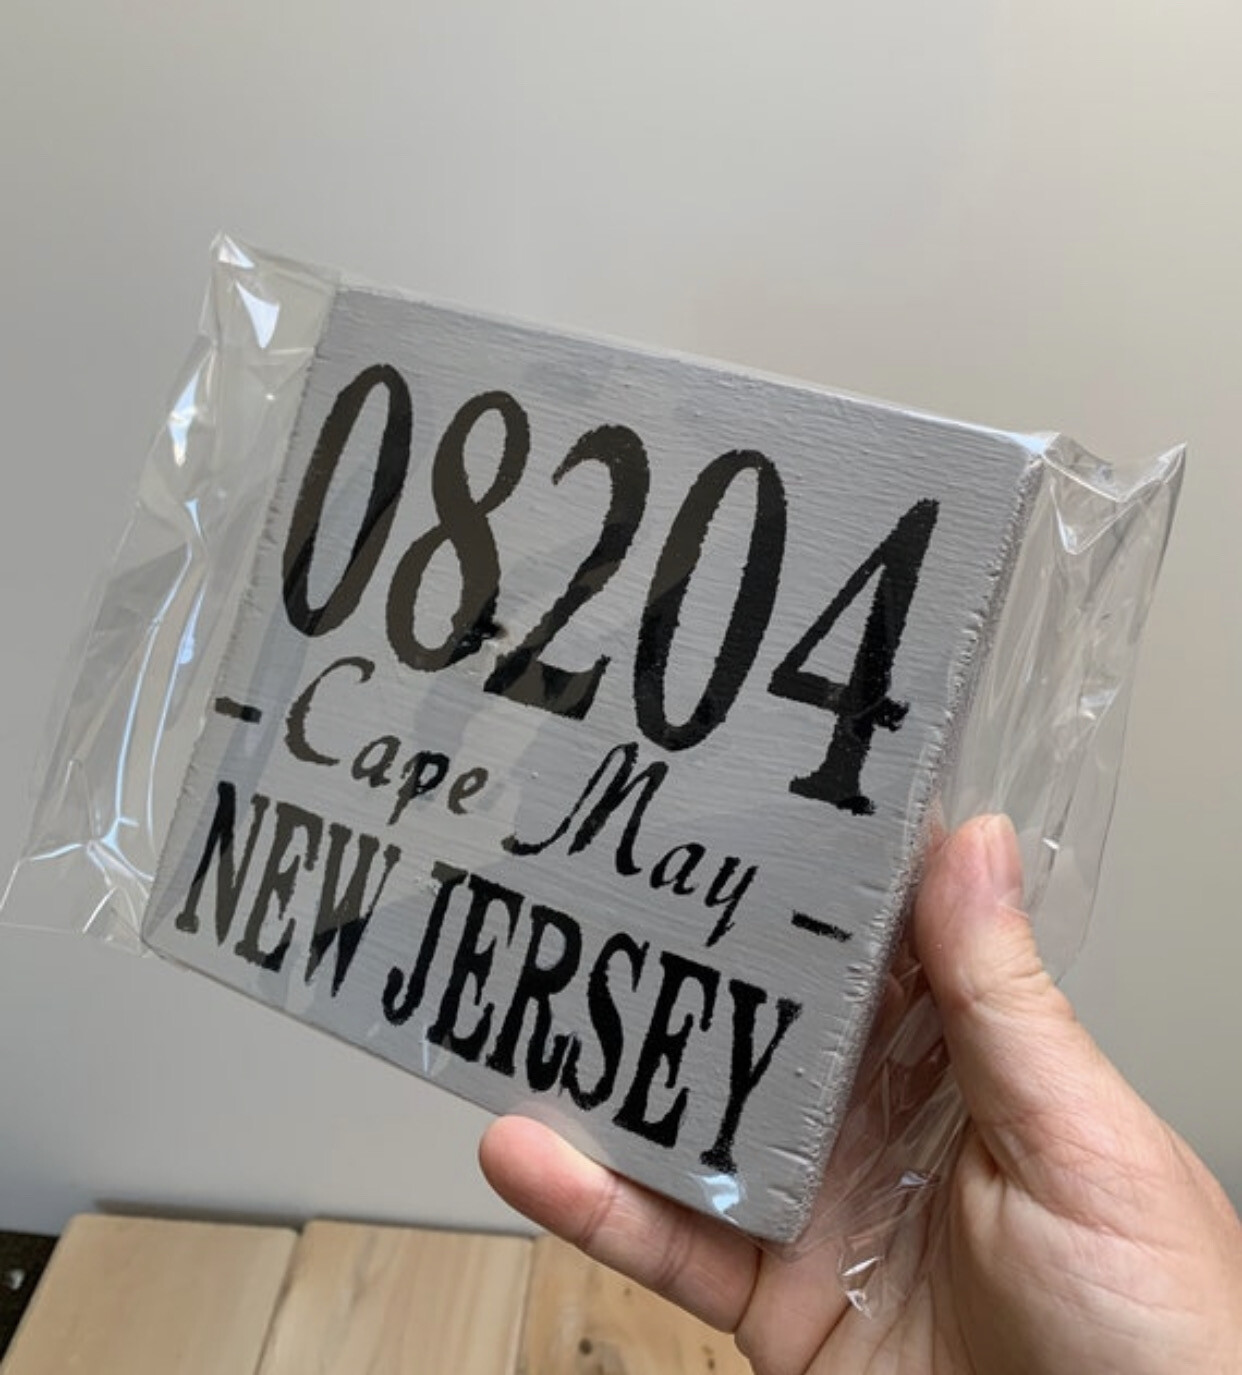 Rustic Cape May NJ Wooden Sign - 08204 Zip Code Sign - Cape May New Jersey Sign